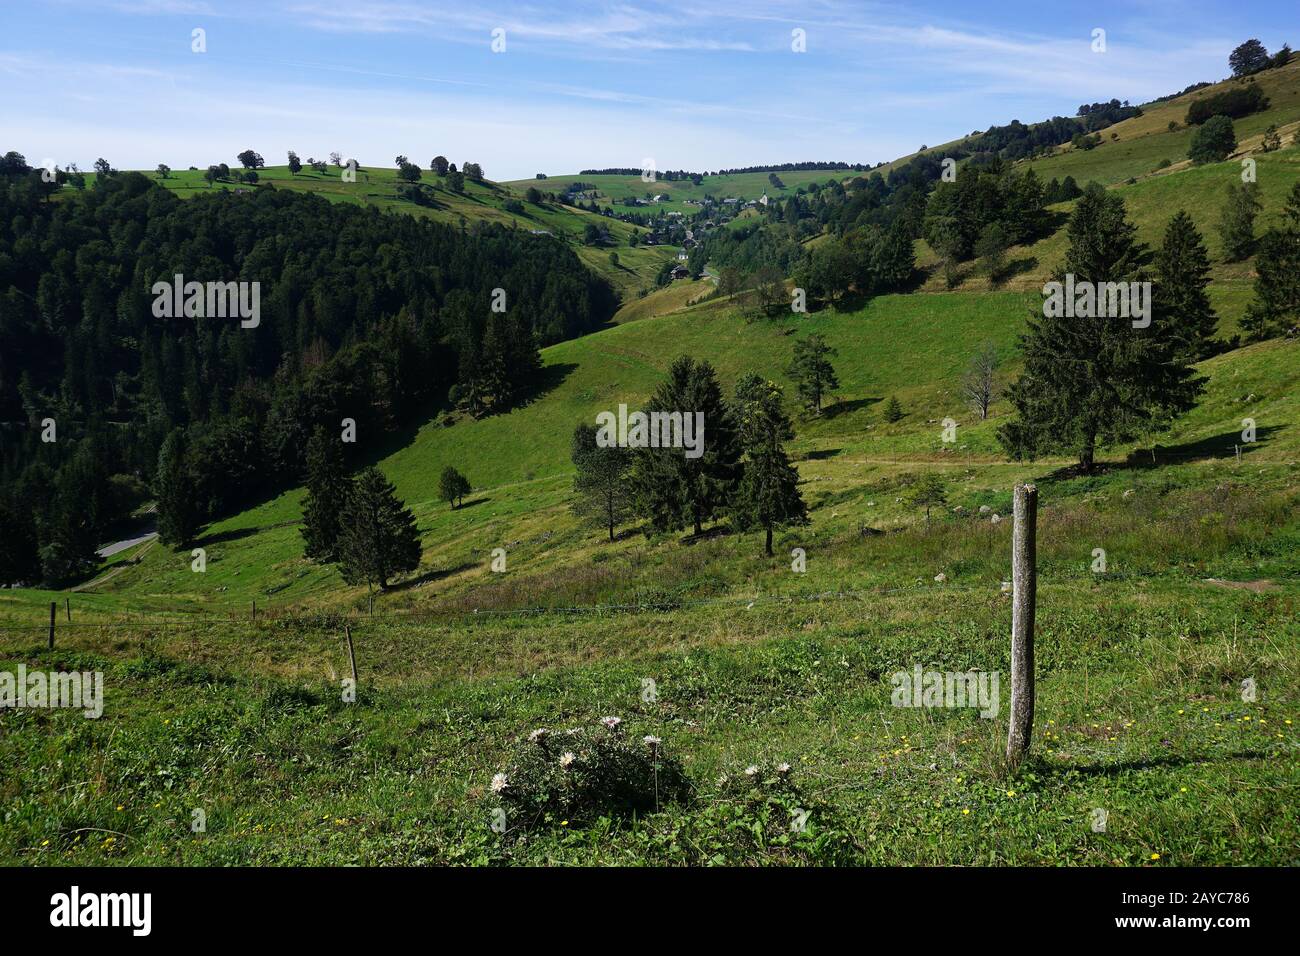 Hiking near the mountain Schauinsland in the Black Forest, Germany Stock Photo